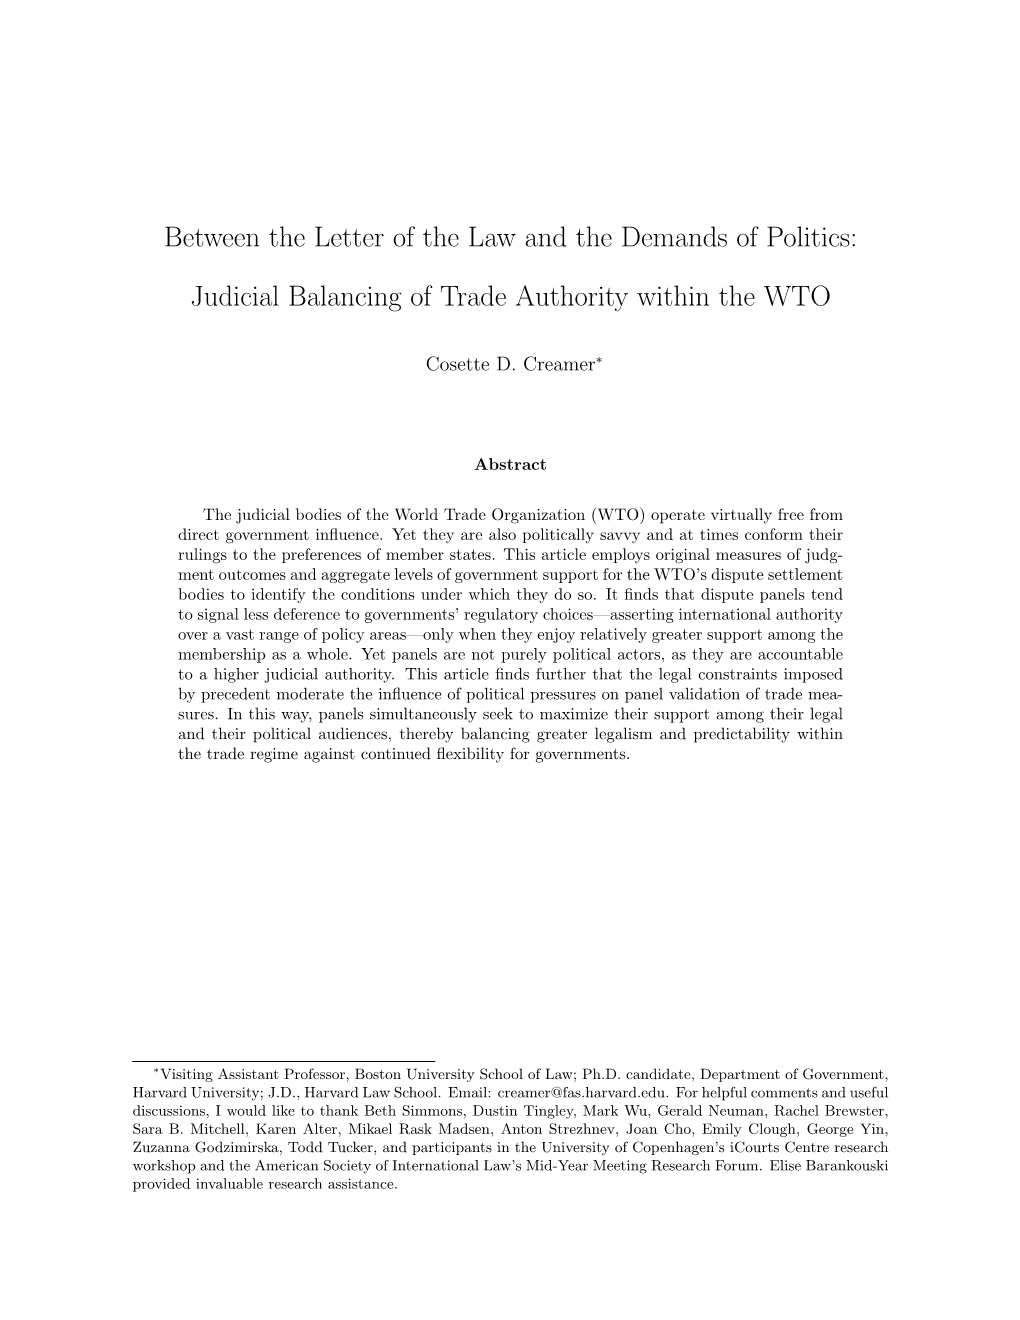 Judicial Balancing of Trade Authority Within the WTO